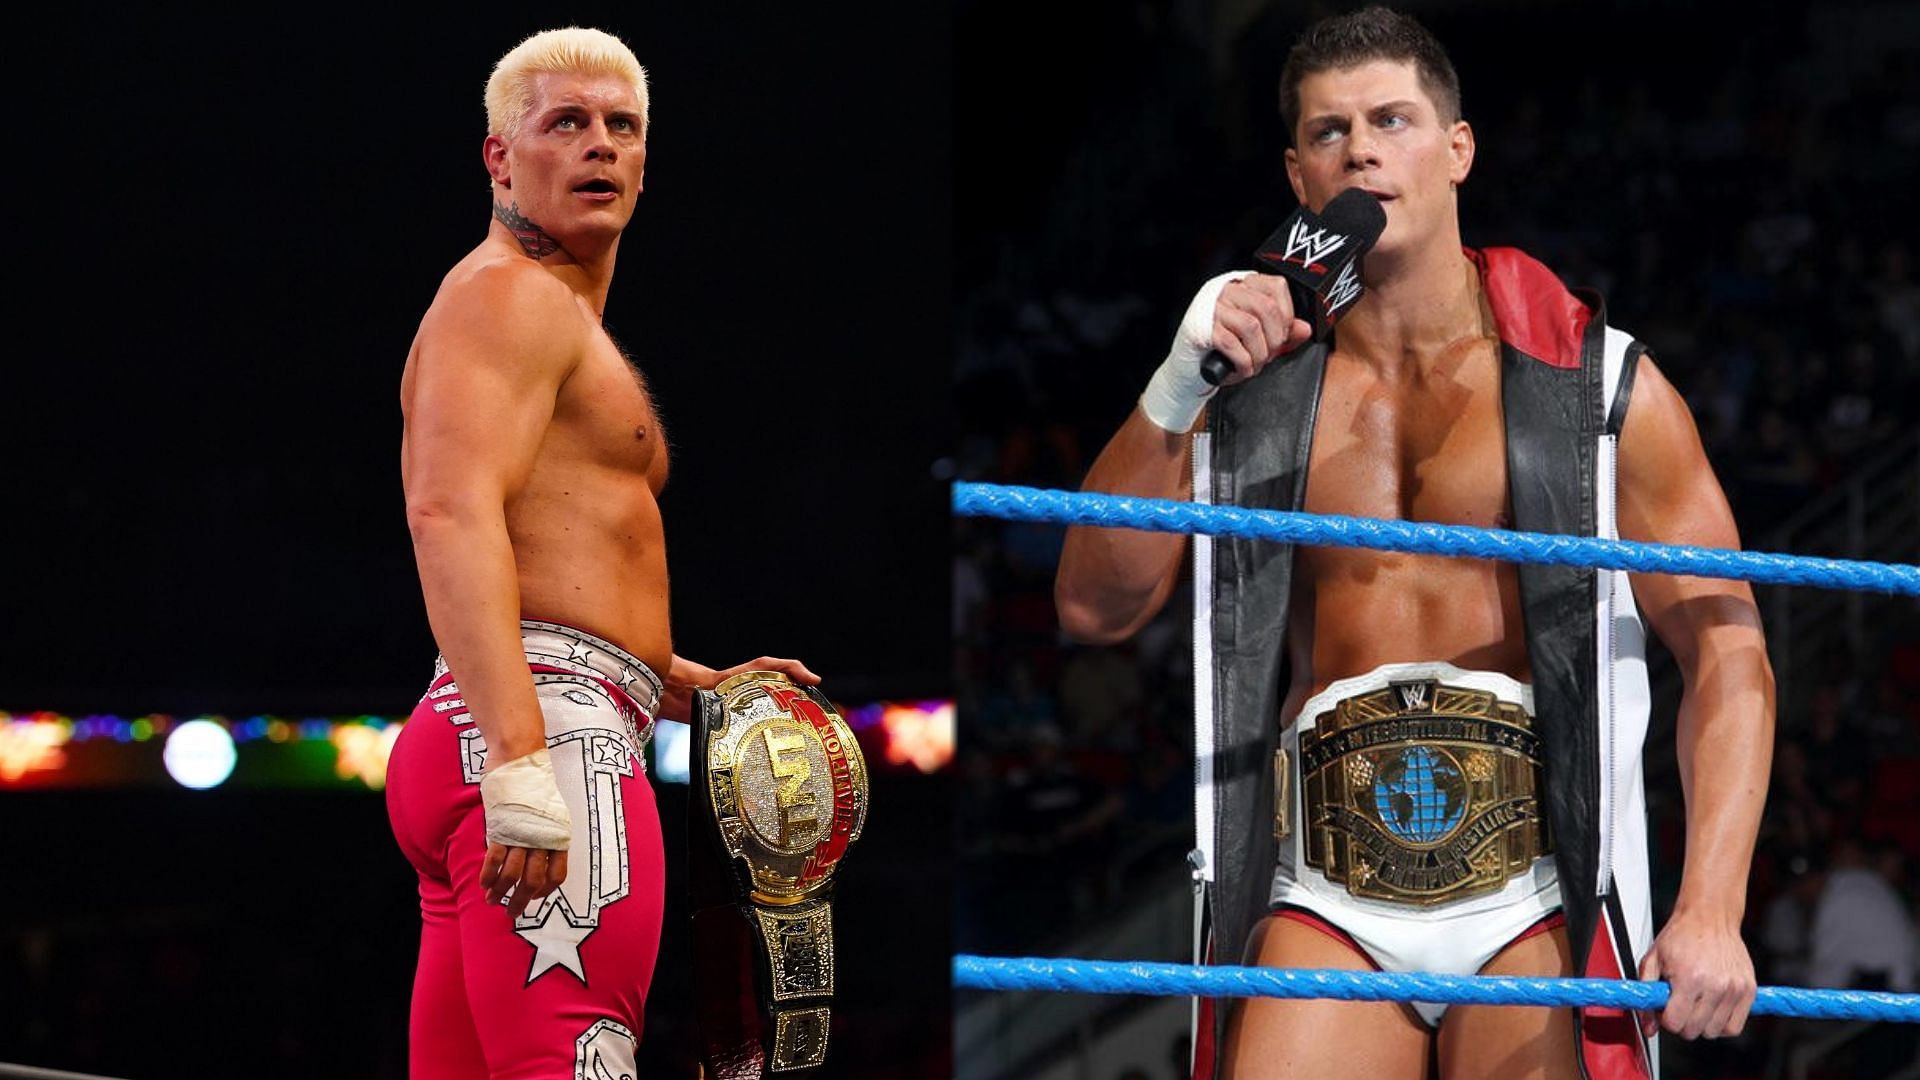 Rhodes has found himself in both AEW and WWE.